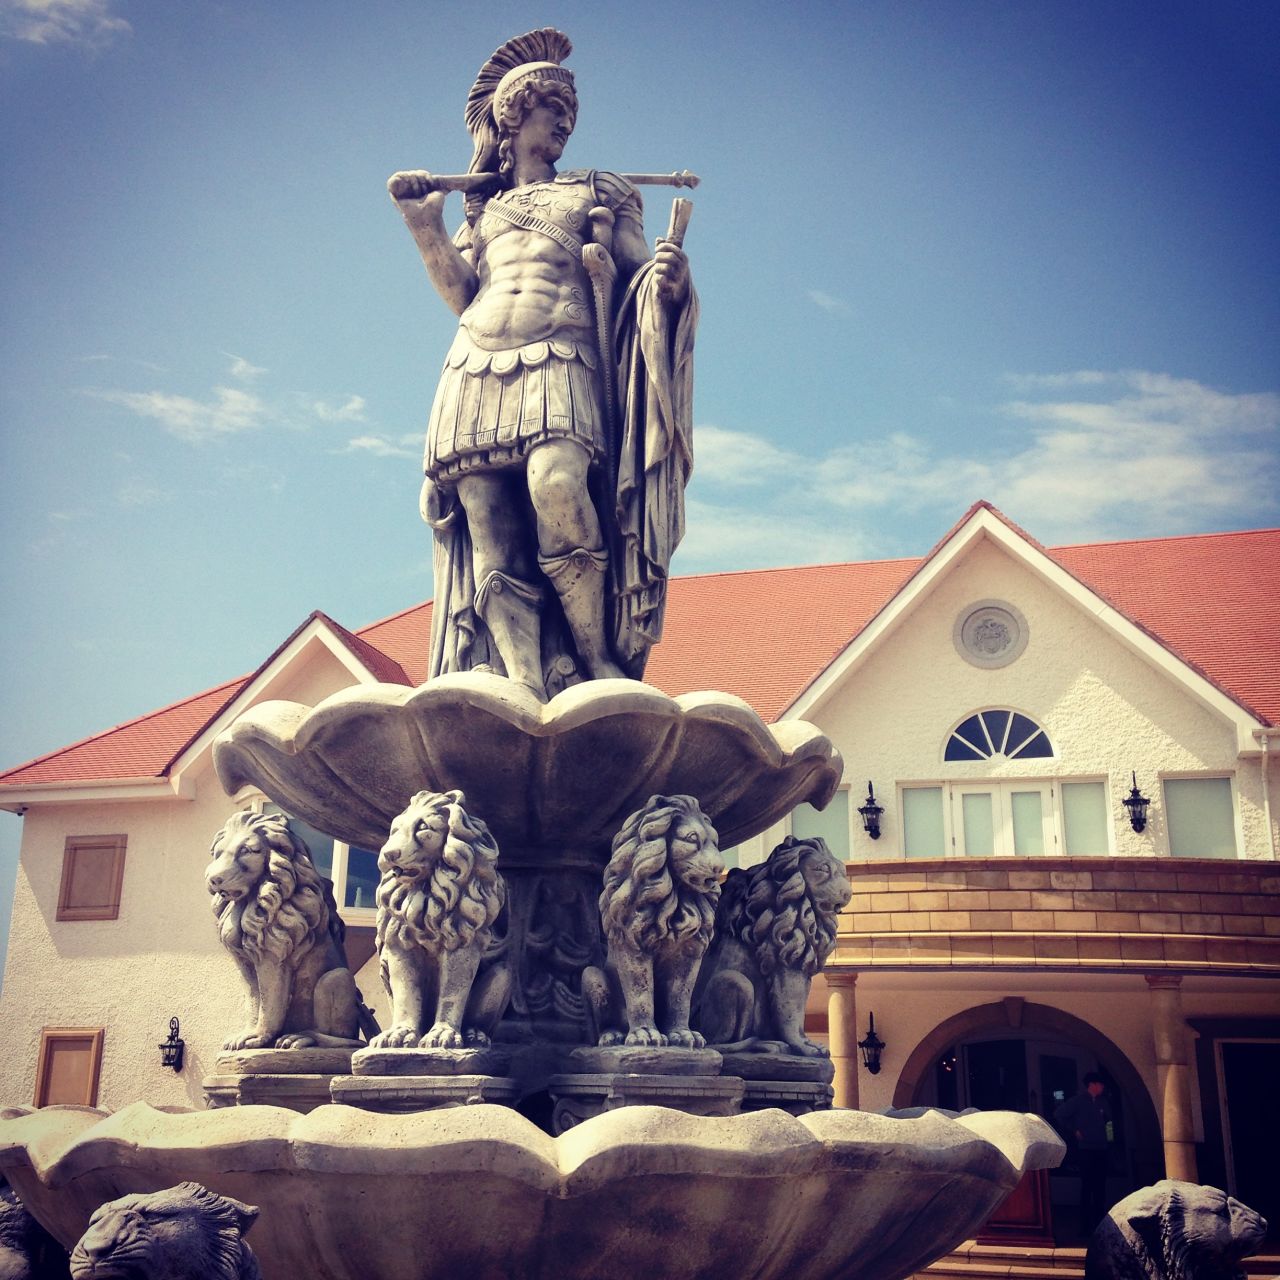 A Roman statue adorns a fountain outside the Turnberry clubhouse on what McDines describes as "one of the best golf courses in the world, if not the best."